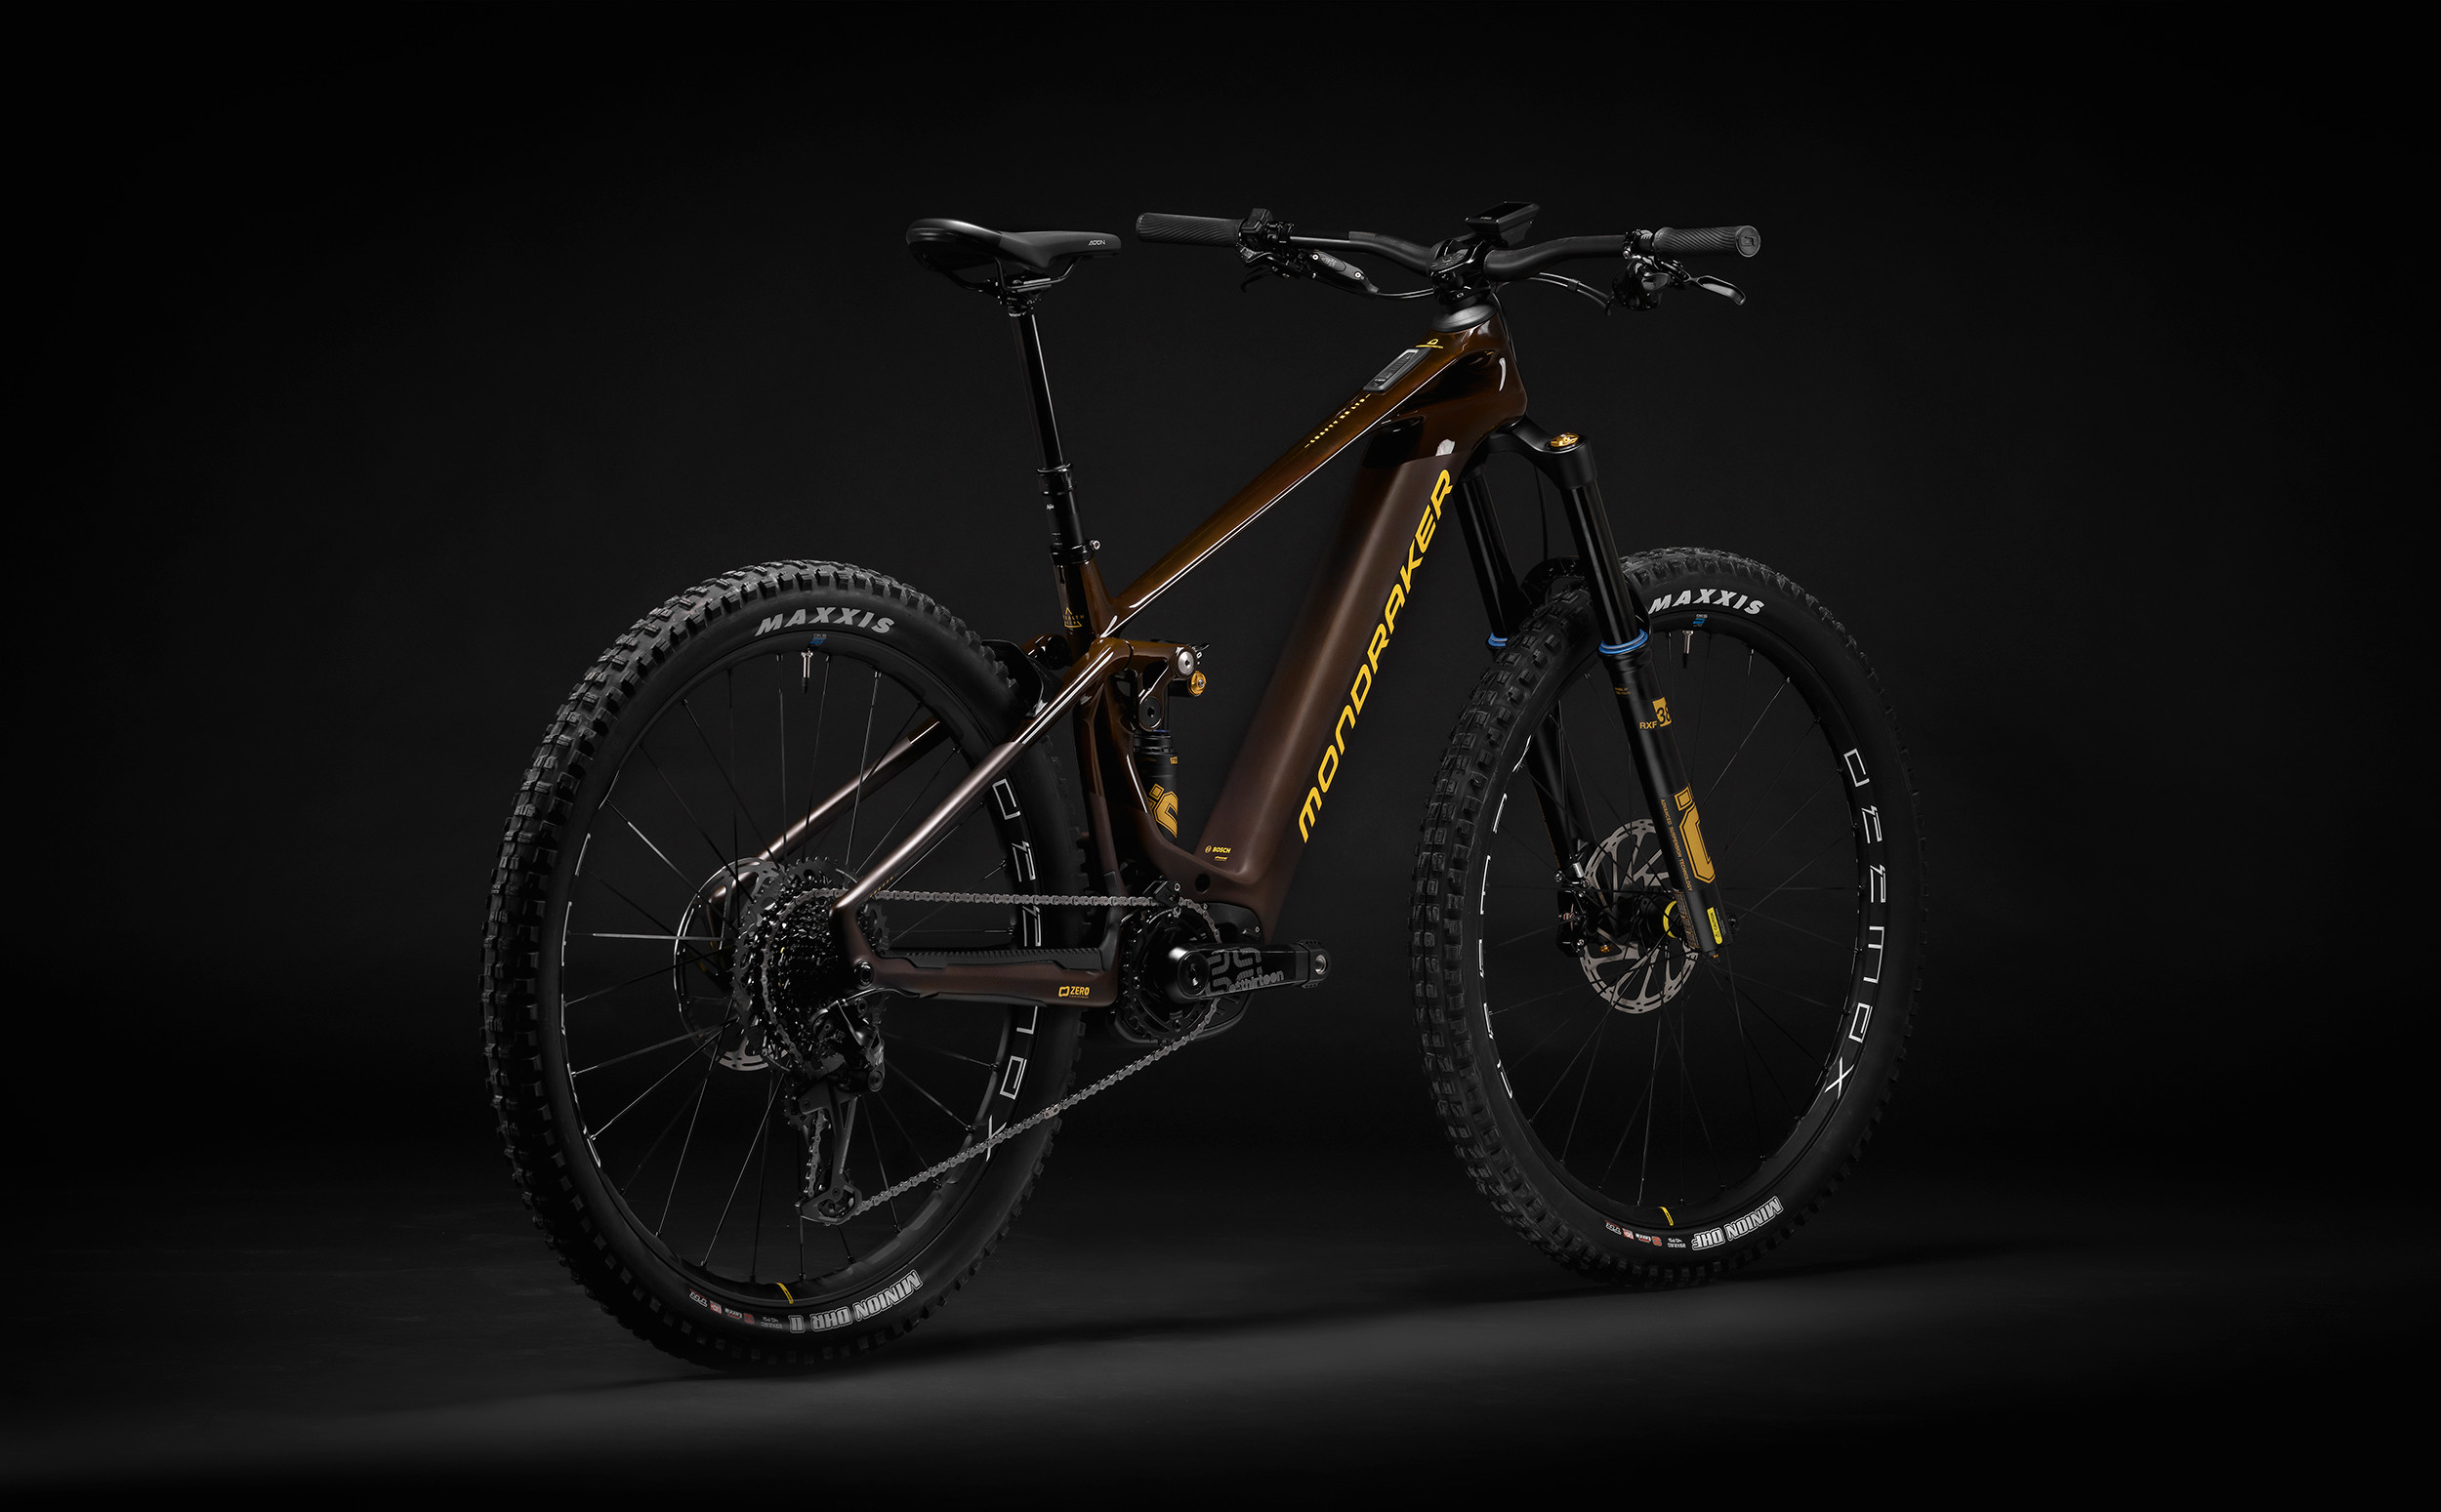 https://www.ovelo.fr/40553-thickbox_extralarge/crafty-carbon-xr-ltd-750wh.jpg